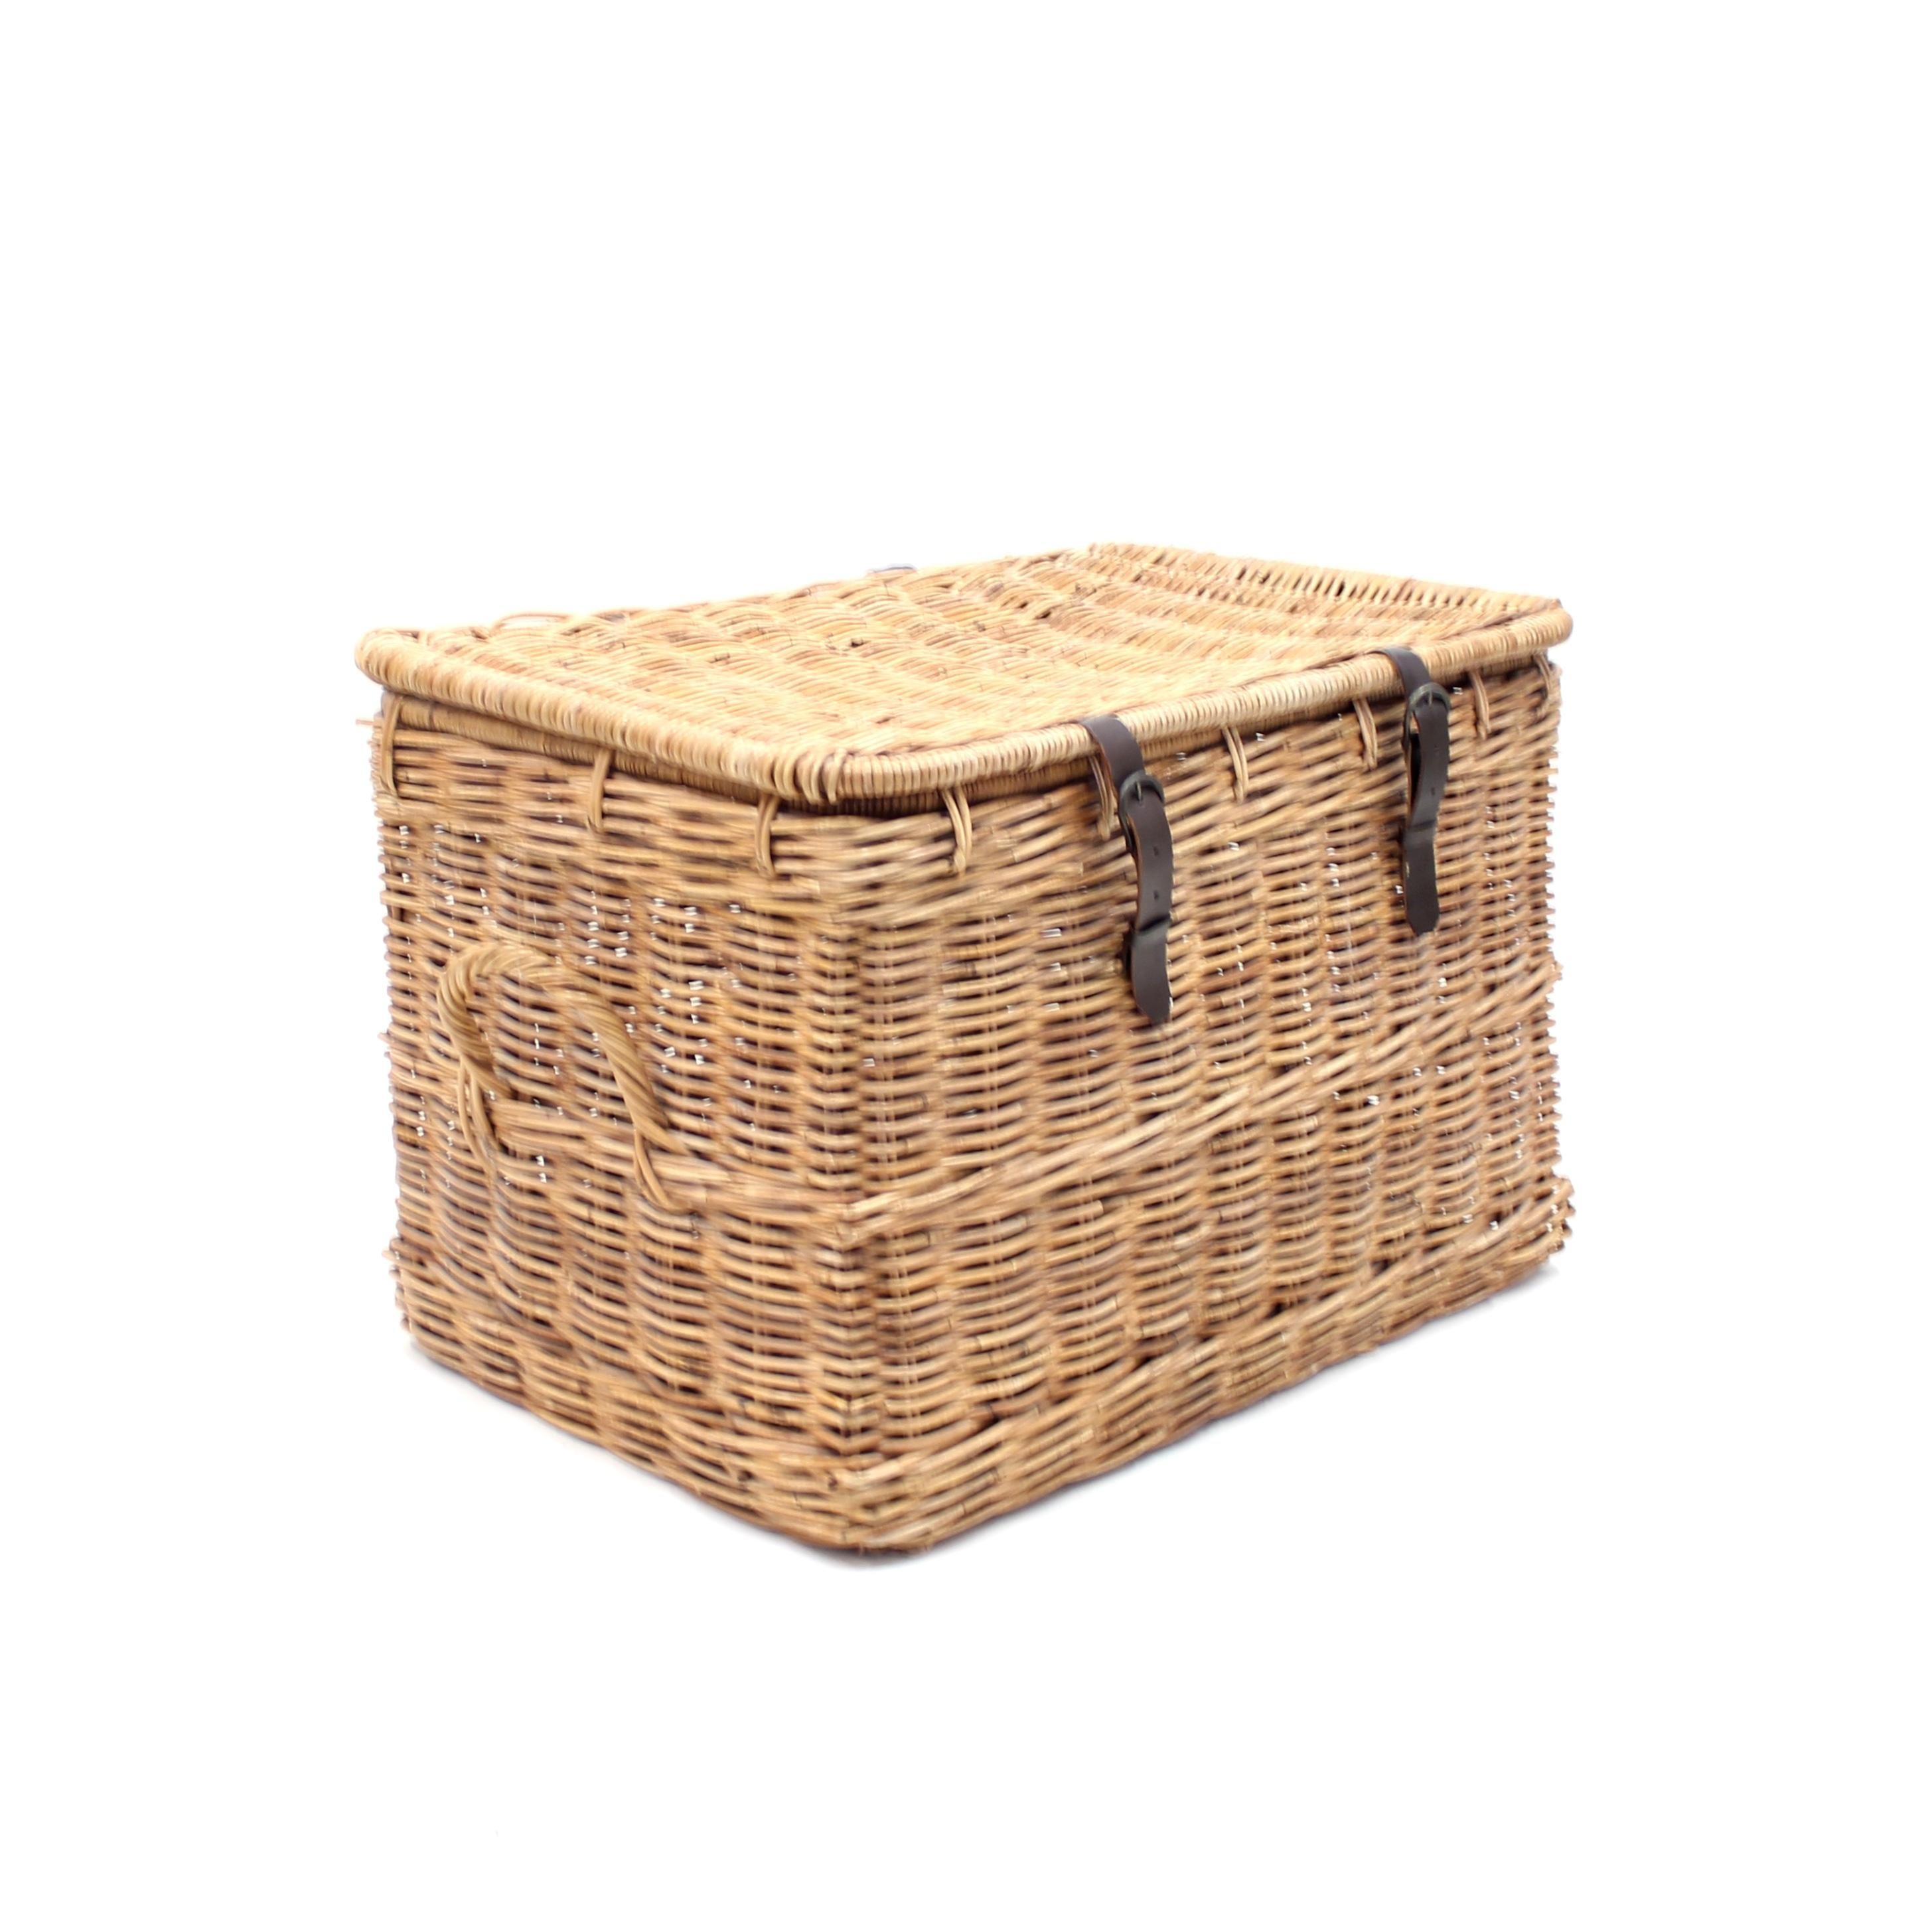 Vintage wicker laundry basket with lid and leather straps. Overall very good vintage condition with light ware consistent with age and use. Leather straps may be a later addition.